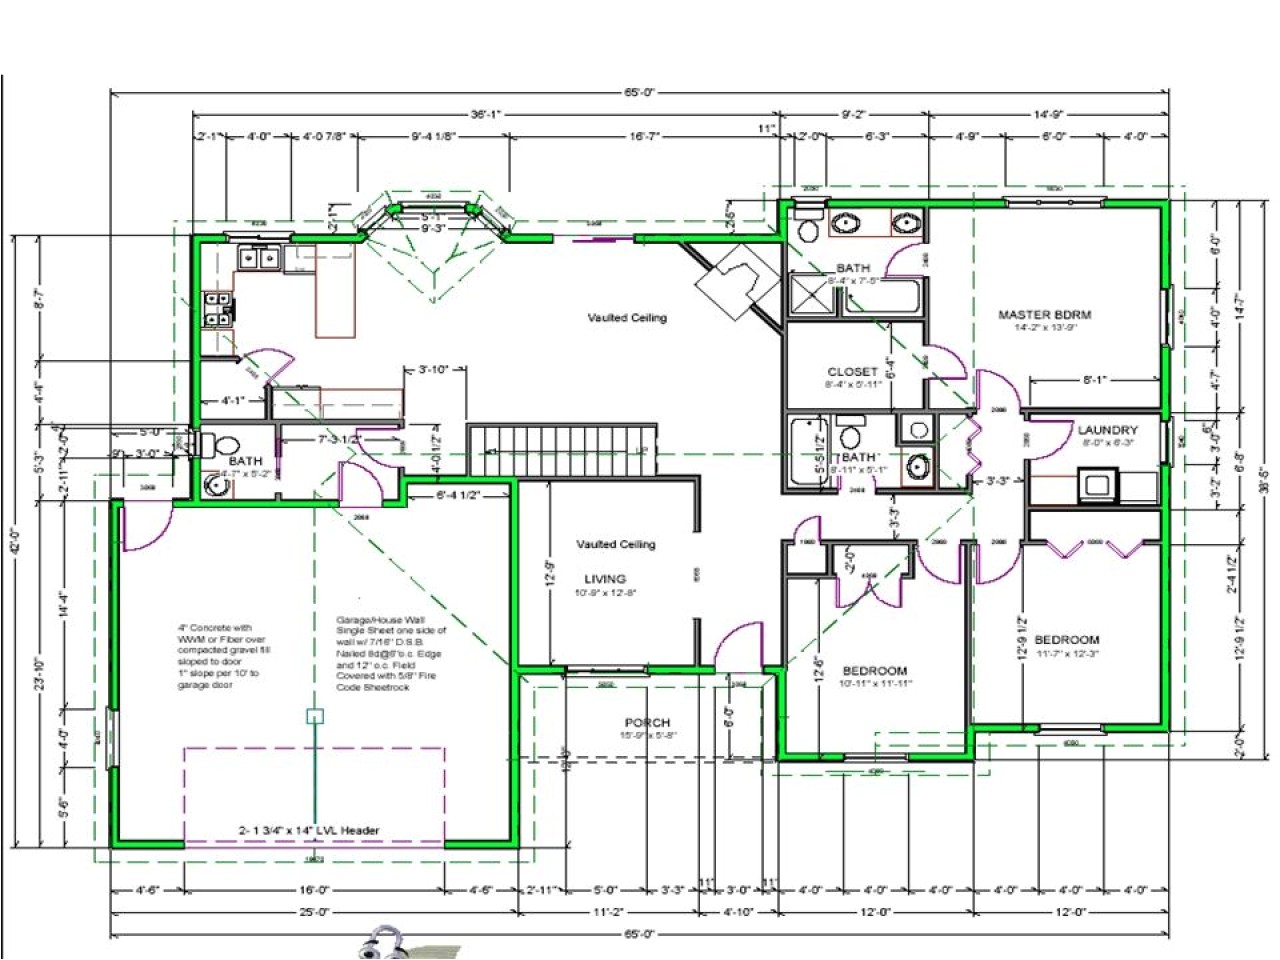 48e43117086a4357 draw house plans free draw simple floor plans free